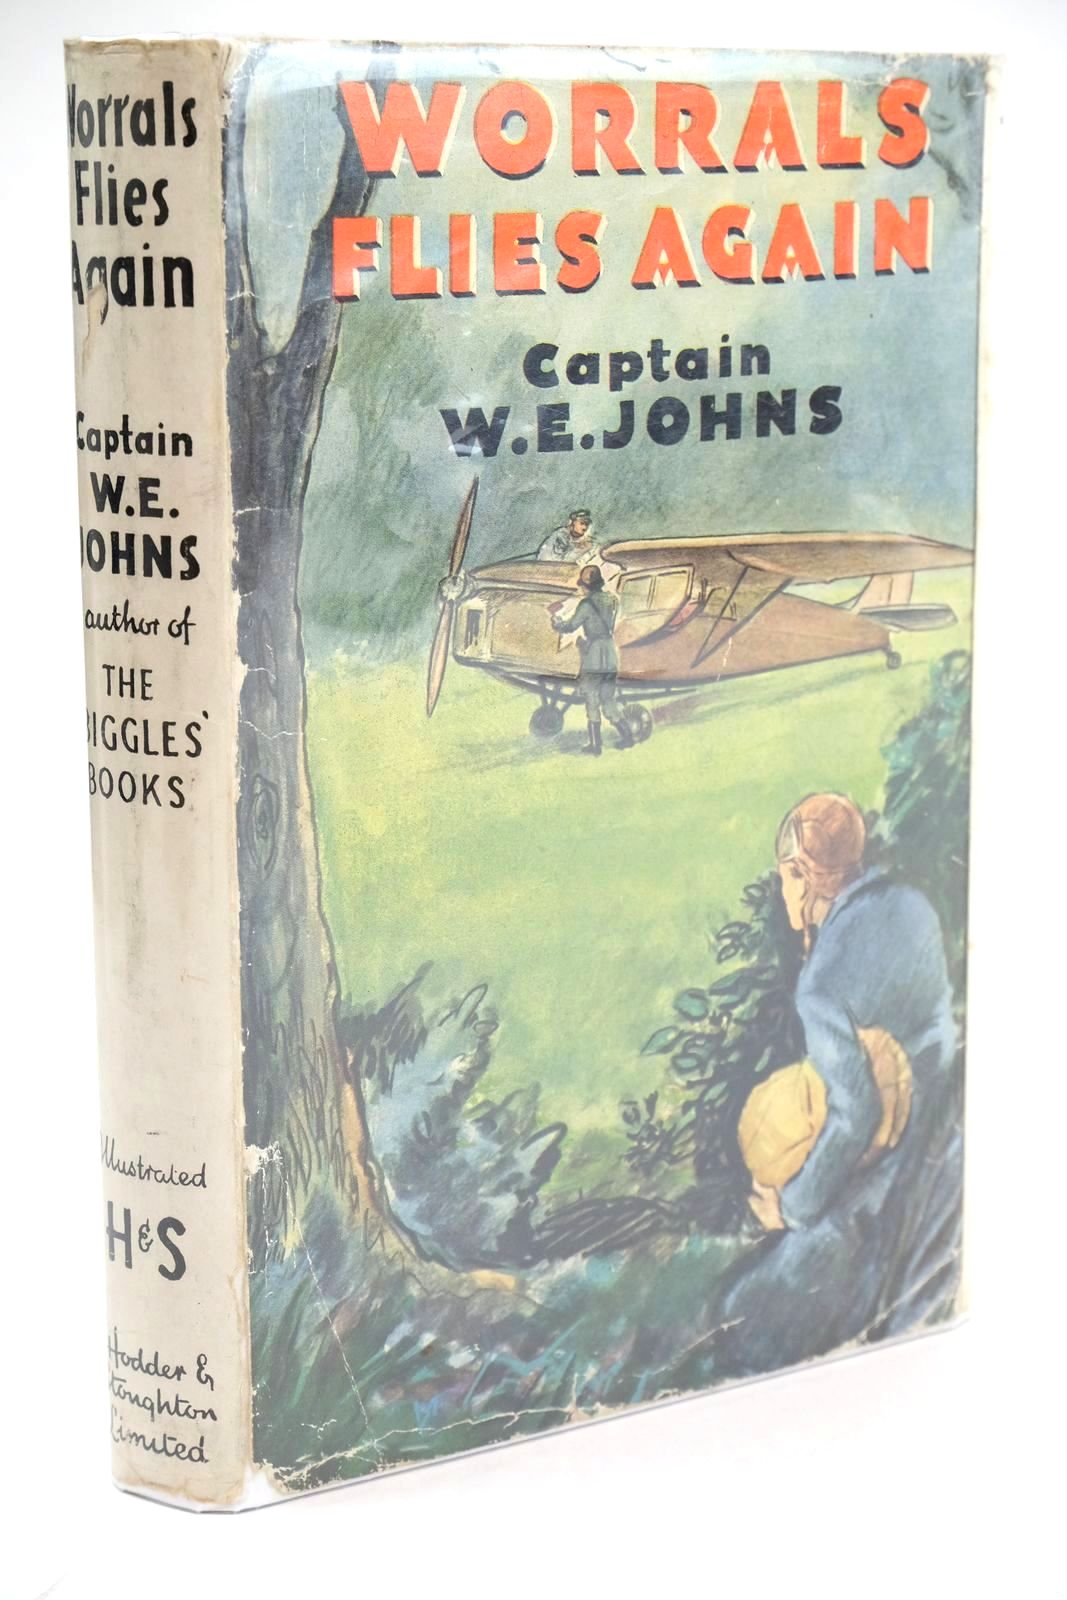 Photo of WORRALS FLIES AGAIN written by Johns, W.E. illustrated by Stead,  published by Hodder & Stoughton (STOCK CODE: 1324501)  for sale by Stella & Rose's Books